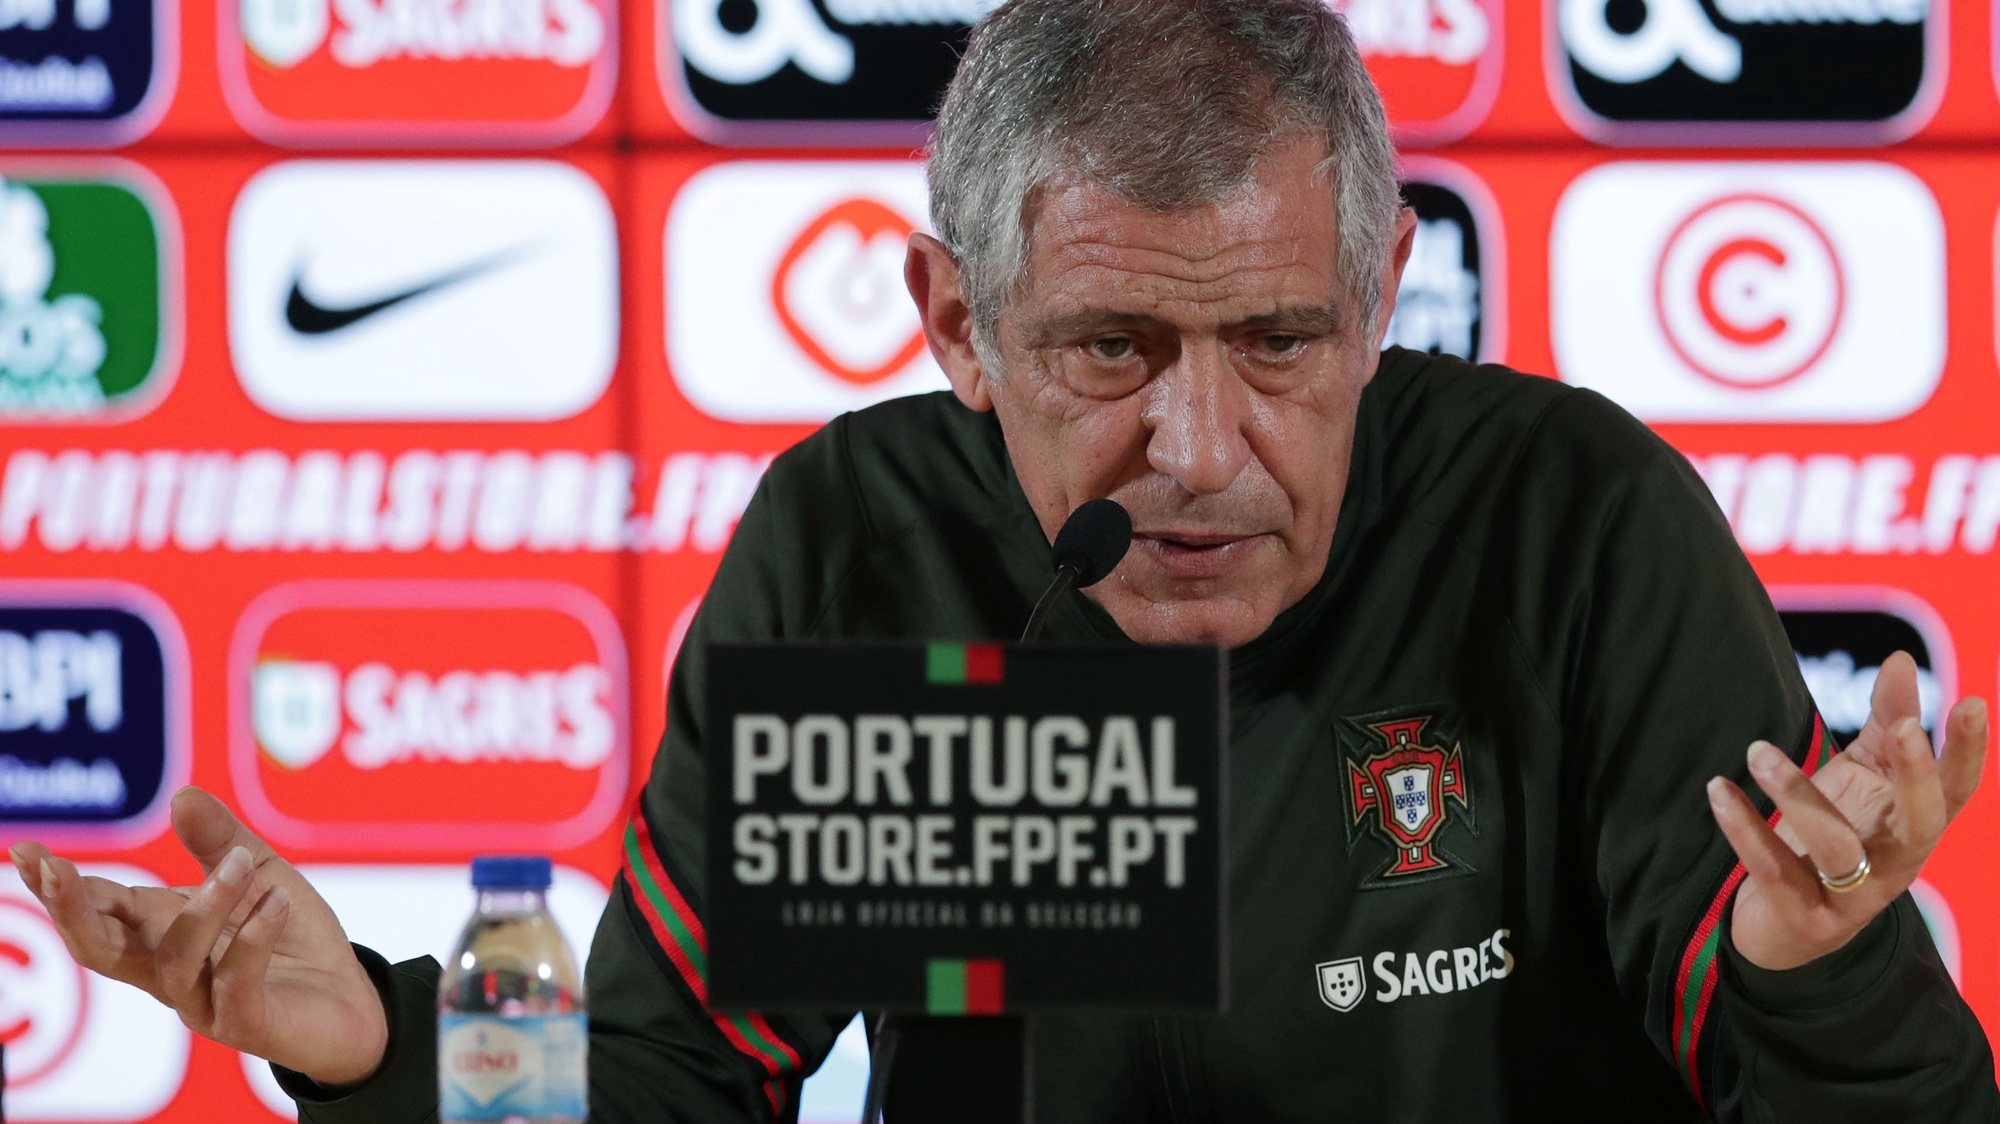 Portugal&#039;s head-coach, Fernando Santos, attends a press conference at Dragao stadium in Porto, Portugal, 28 March 2022. Portugal  will face North Macedonia in their FIFA World Cup Qatar 2022 play-off qualifying soccer match on 29 March 2022. ESTELA SILVA/LUSA